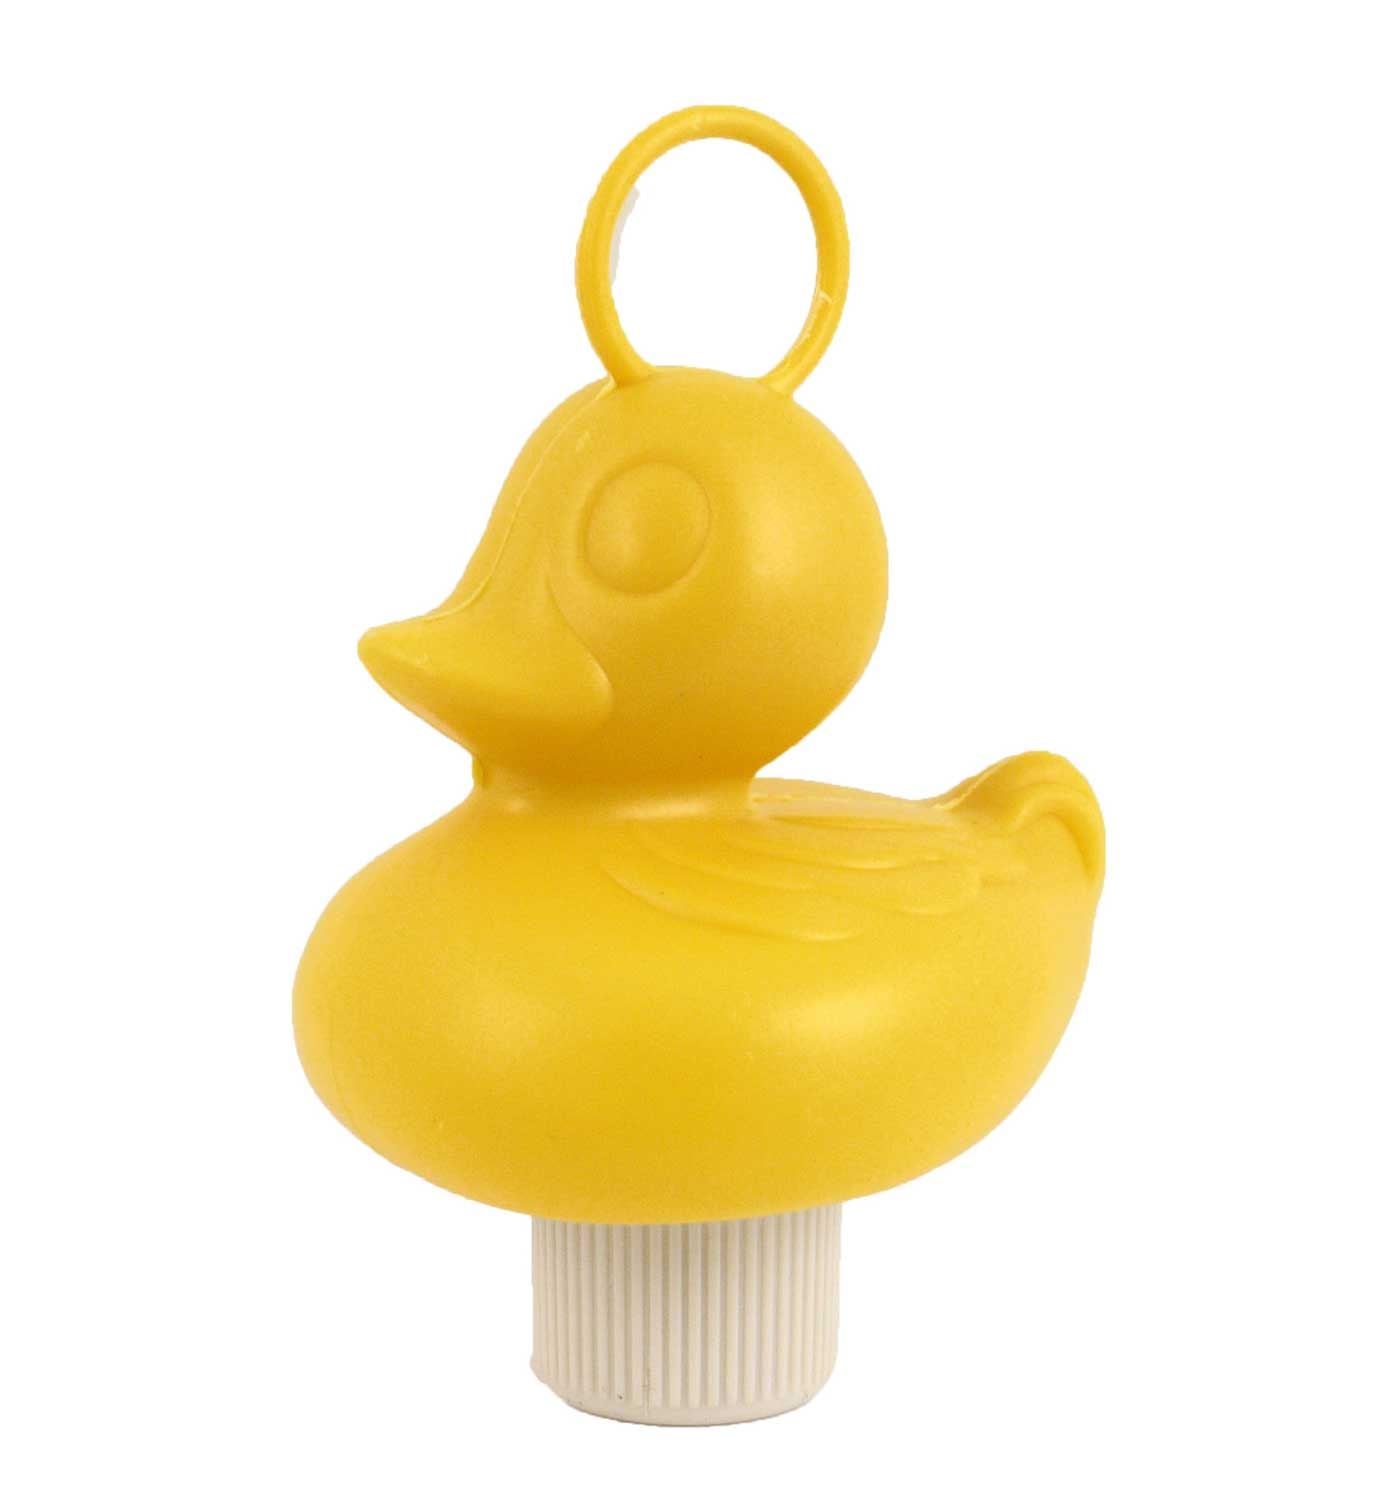 20 Weighted 7cm Plastic Ducks for Hook-a-Duck - Yellow